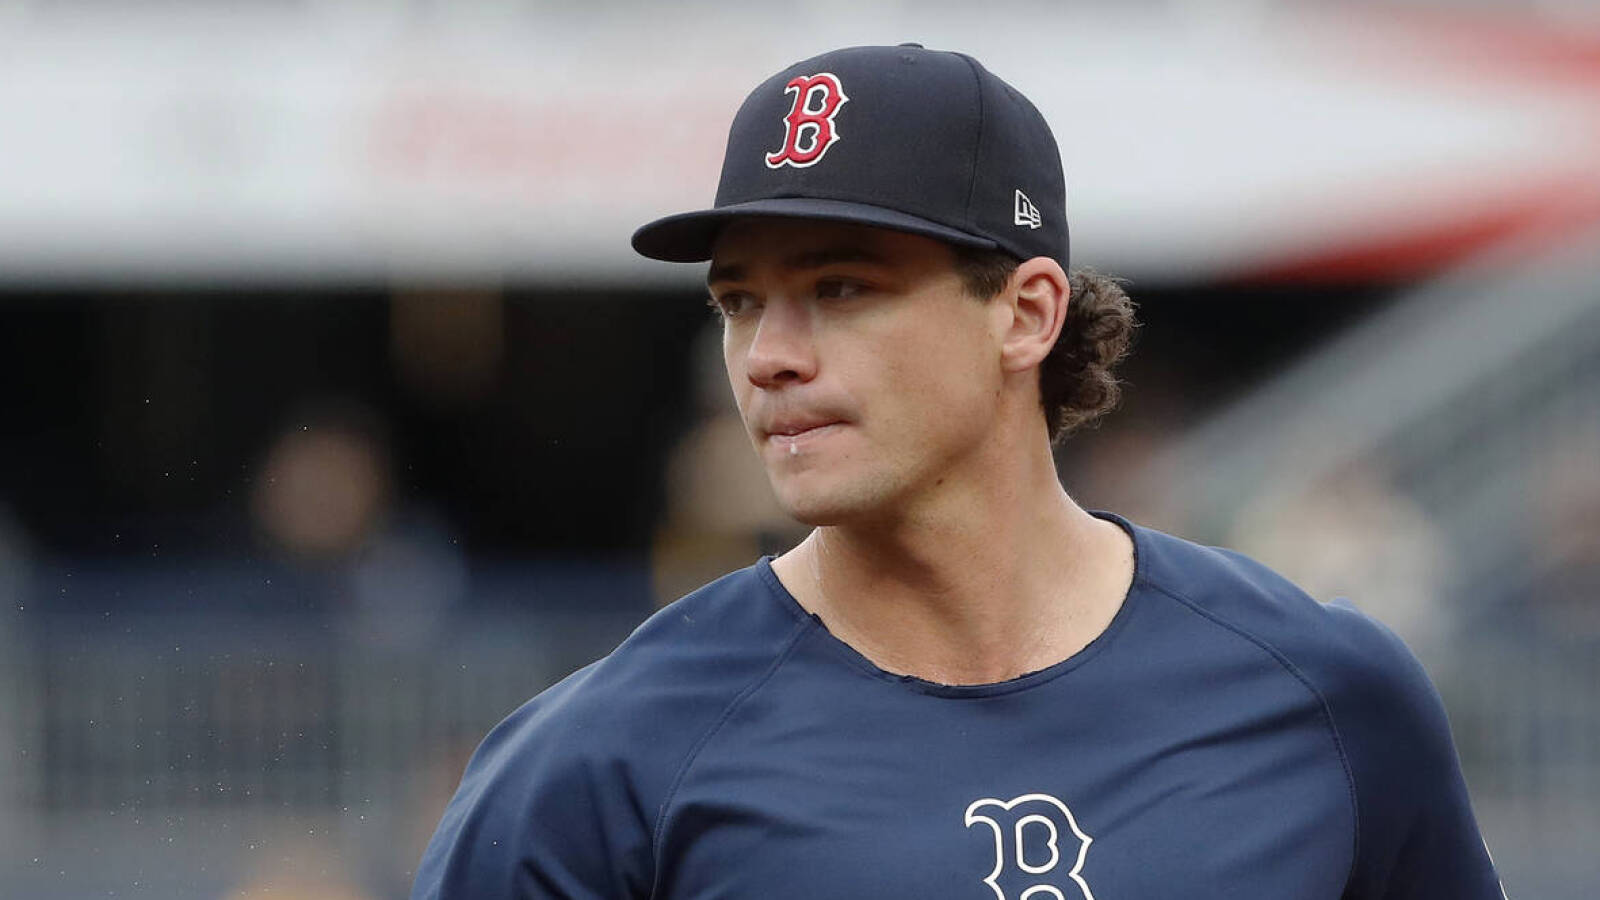 Bobby Dalbec has one last chance to prove himself for the Red Sox